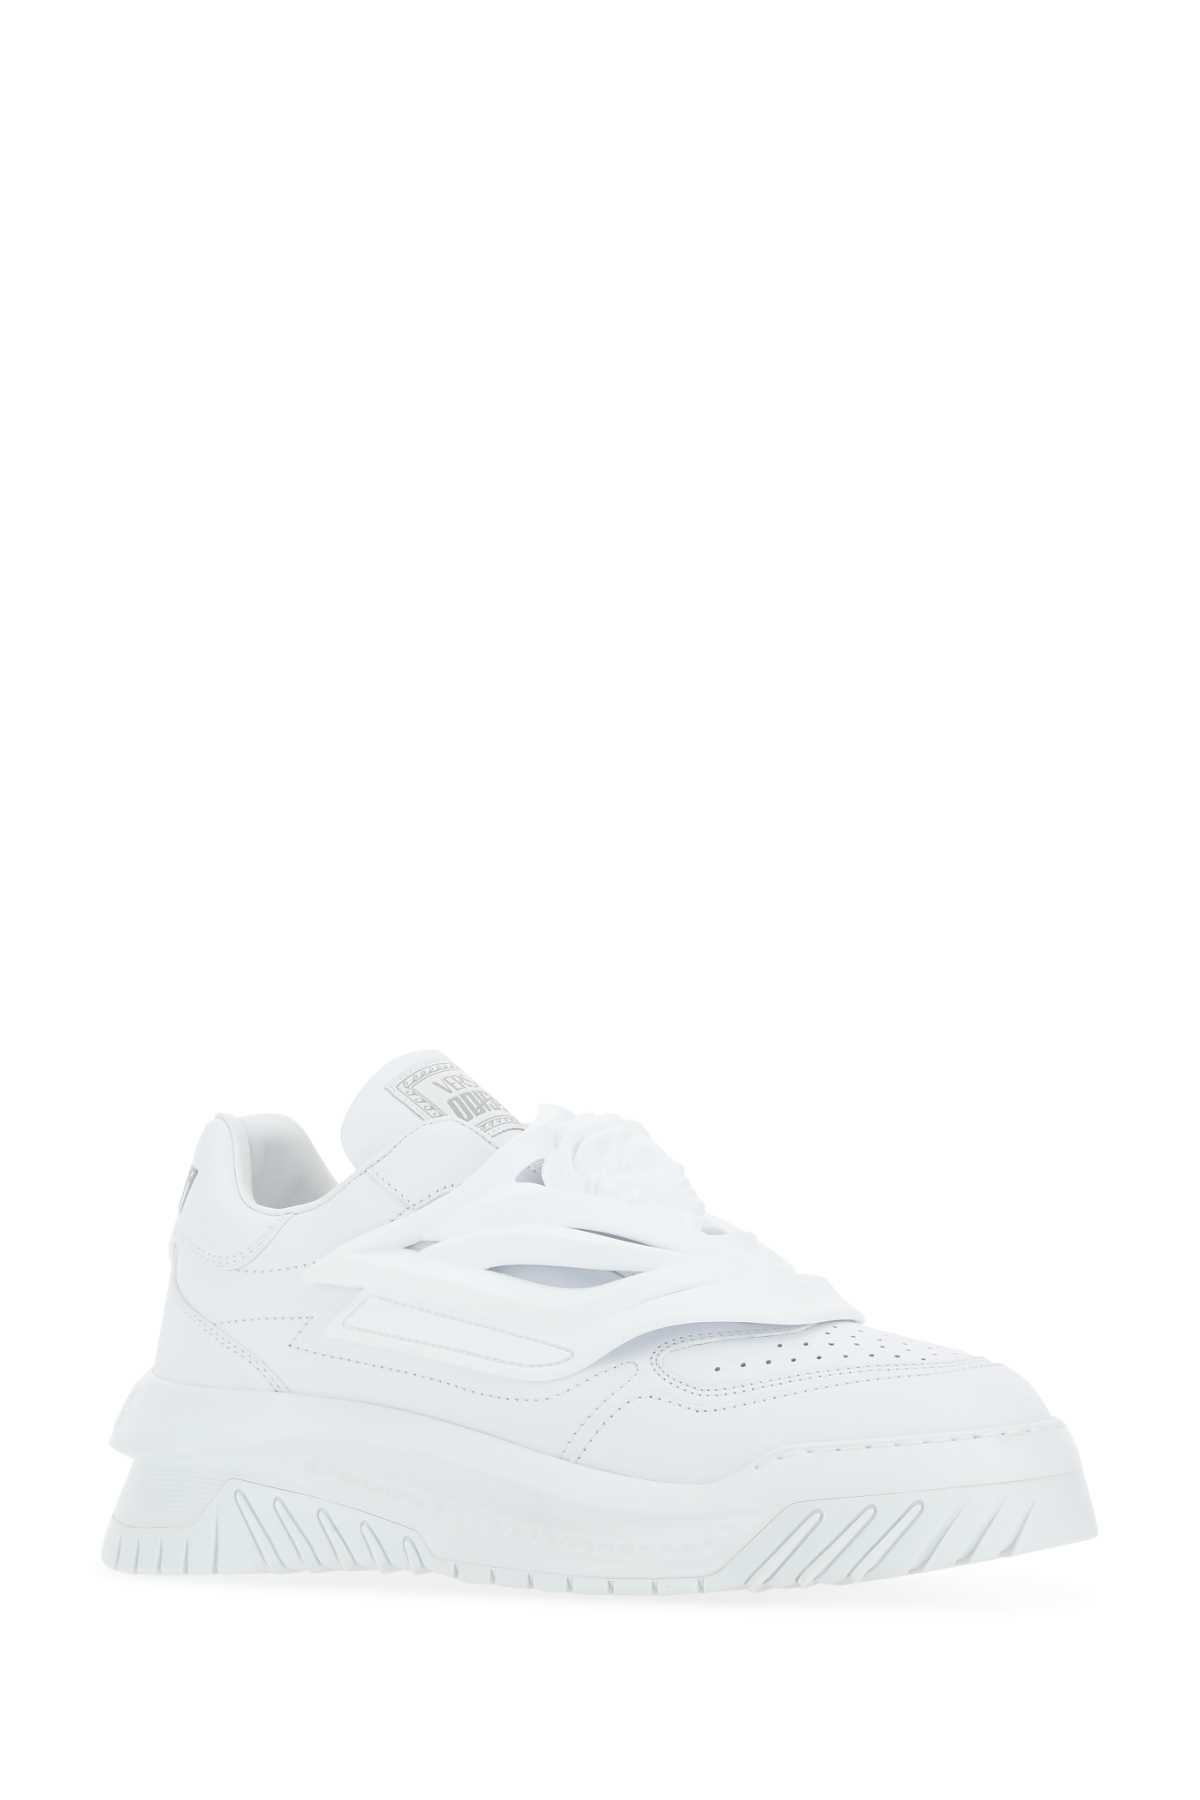 Versace White Leather Odissea Slip Ons In 1w010